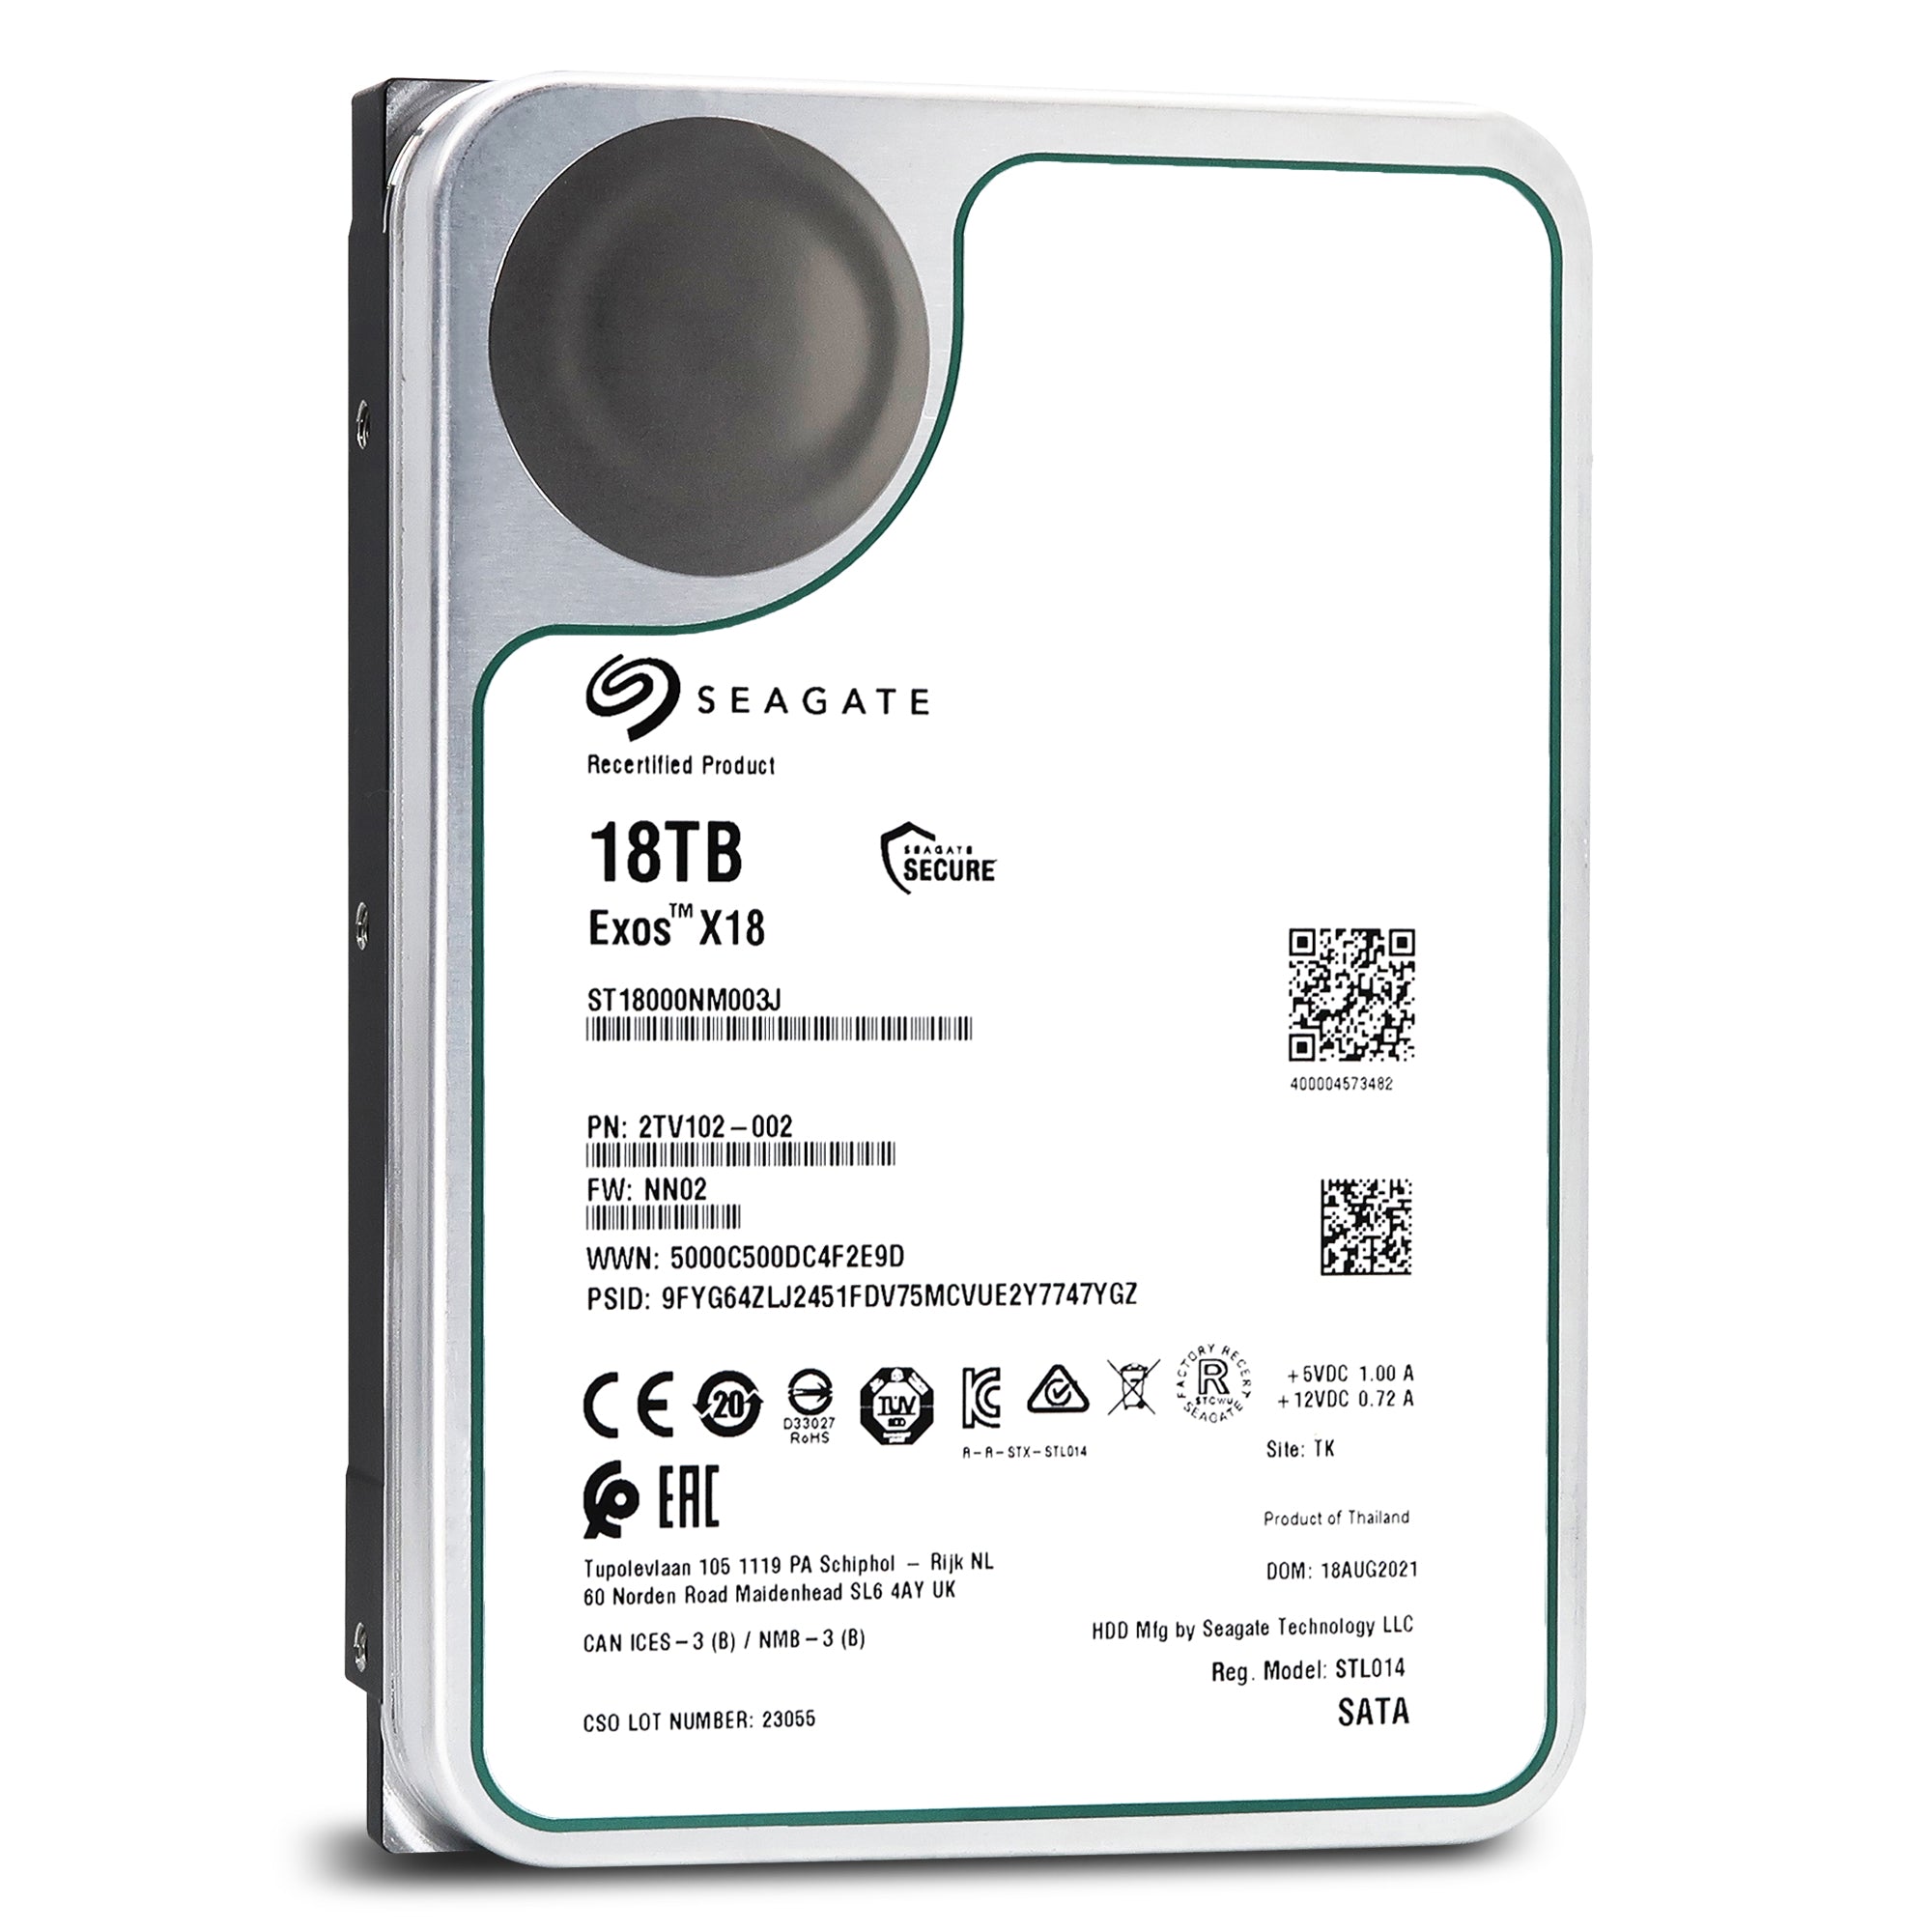 Seagate Exos X18 ST18000NM003J 2TV102-002 18TB 7.2K RPM SATA 6Gb/s 4Kn 3.5in Refurbished HDD Front View